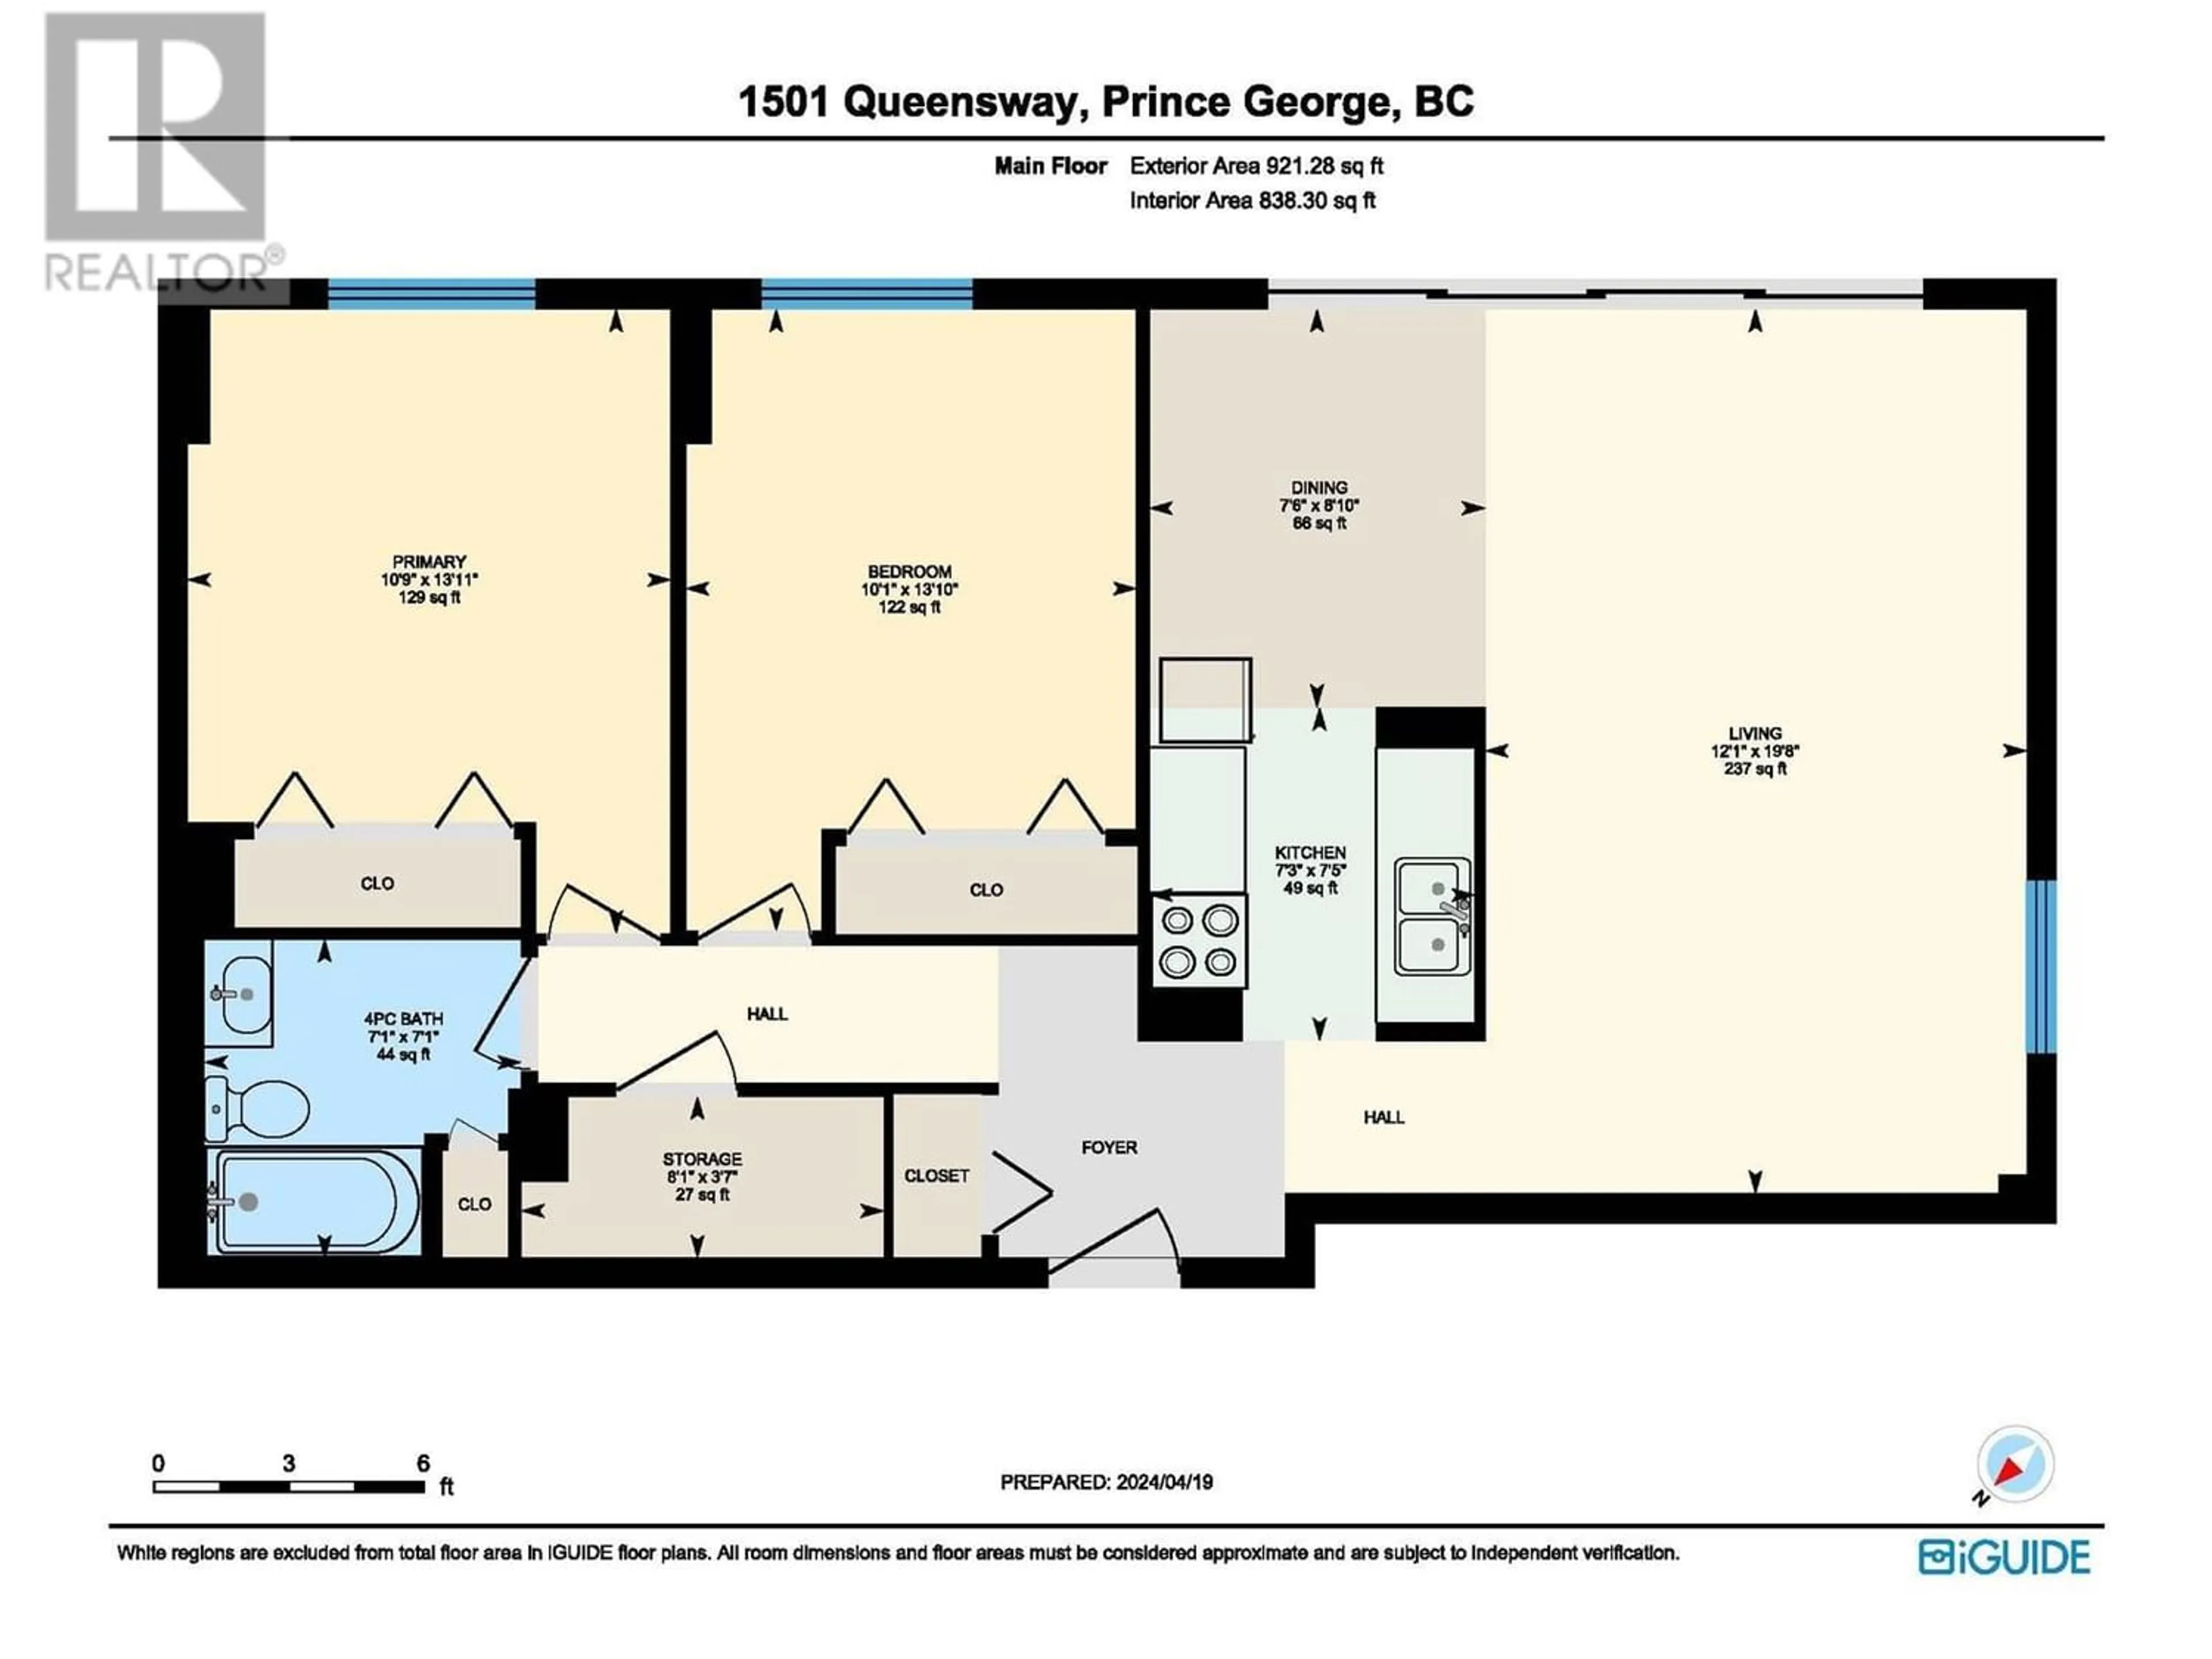 Floor plan for 1007 1501 QUEENSWAY STREET, Prince George British Columbia V2L1L5